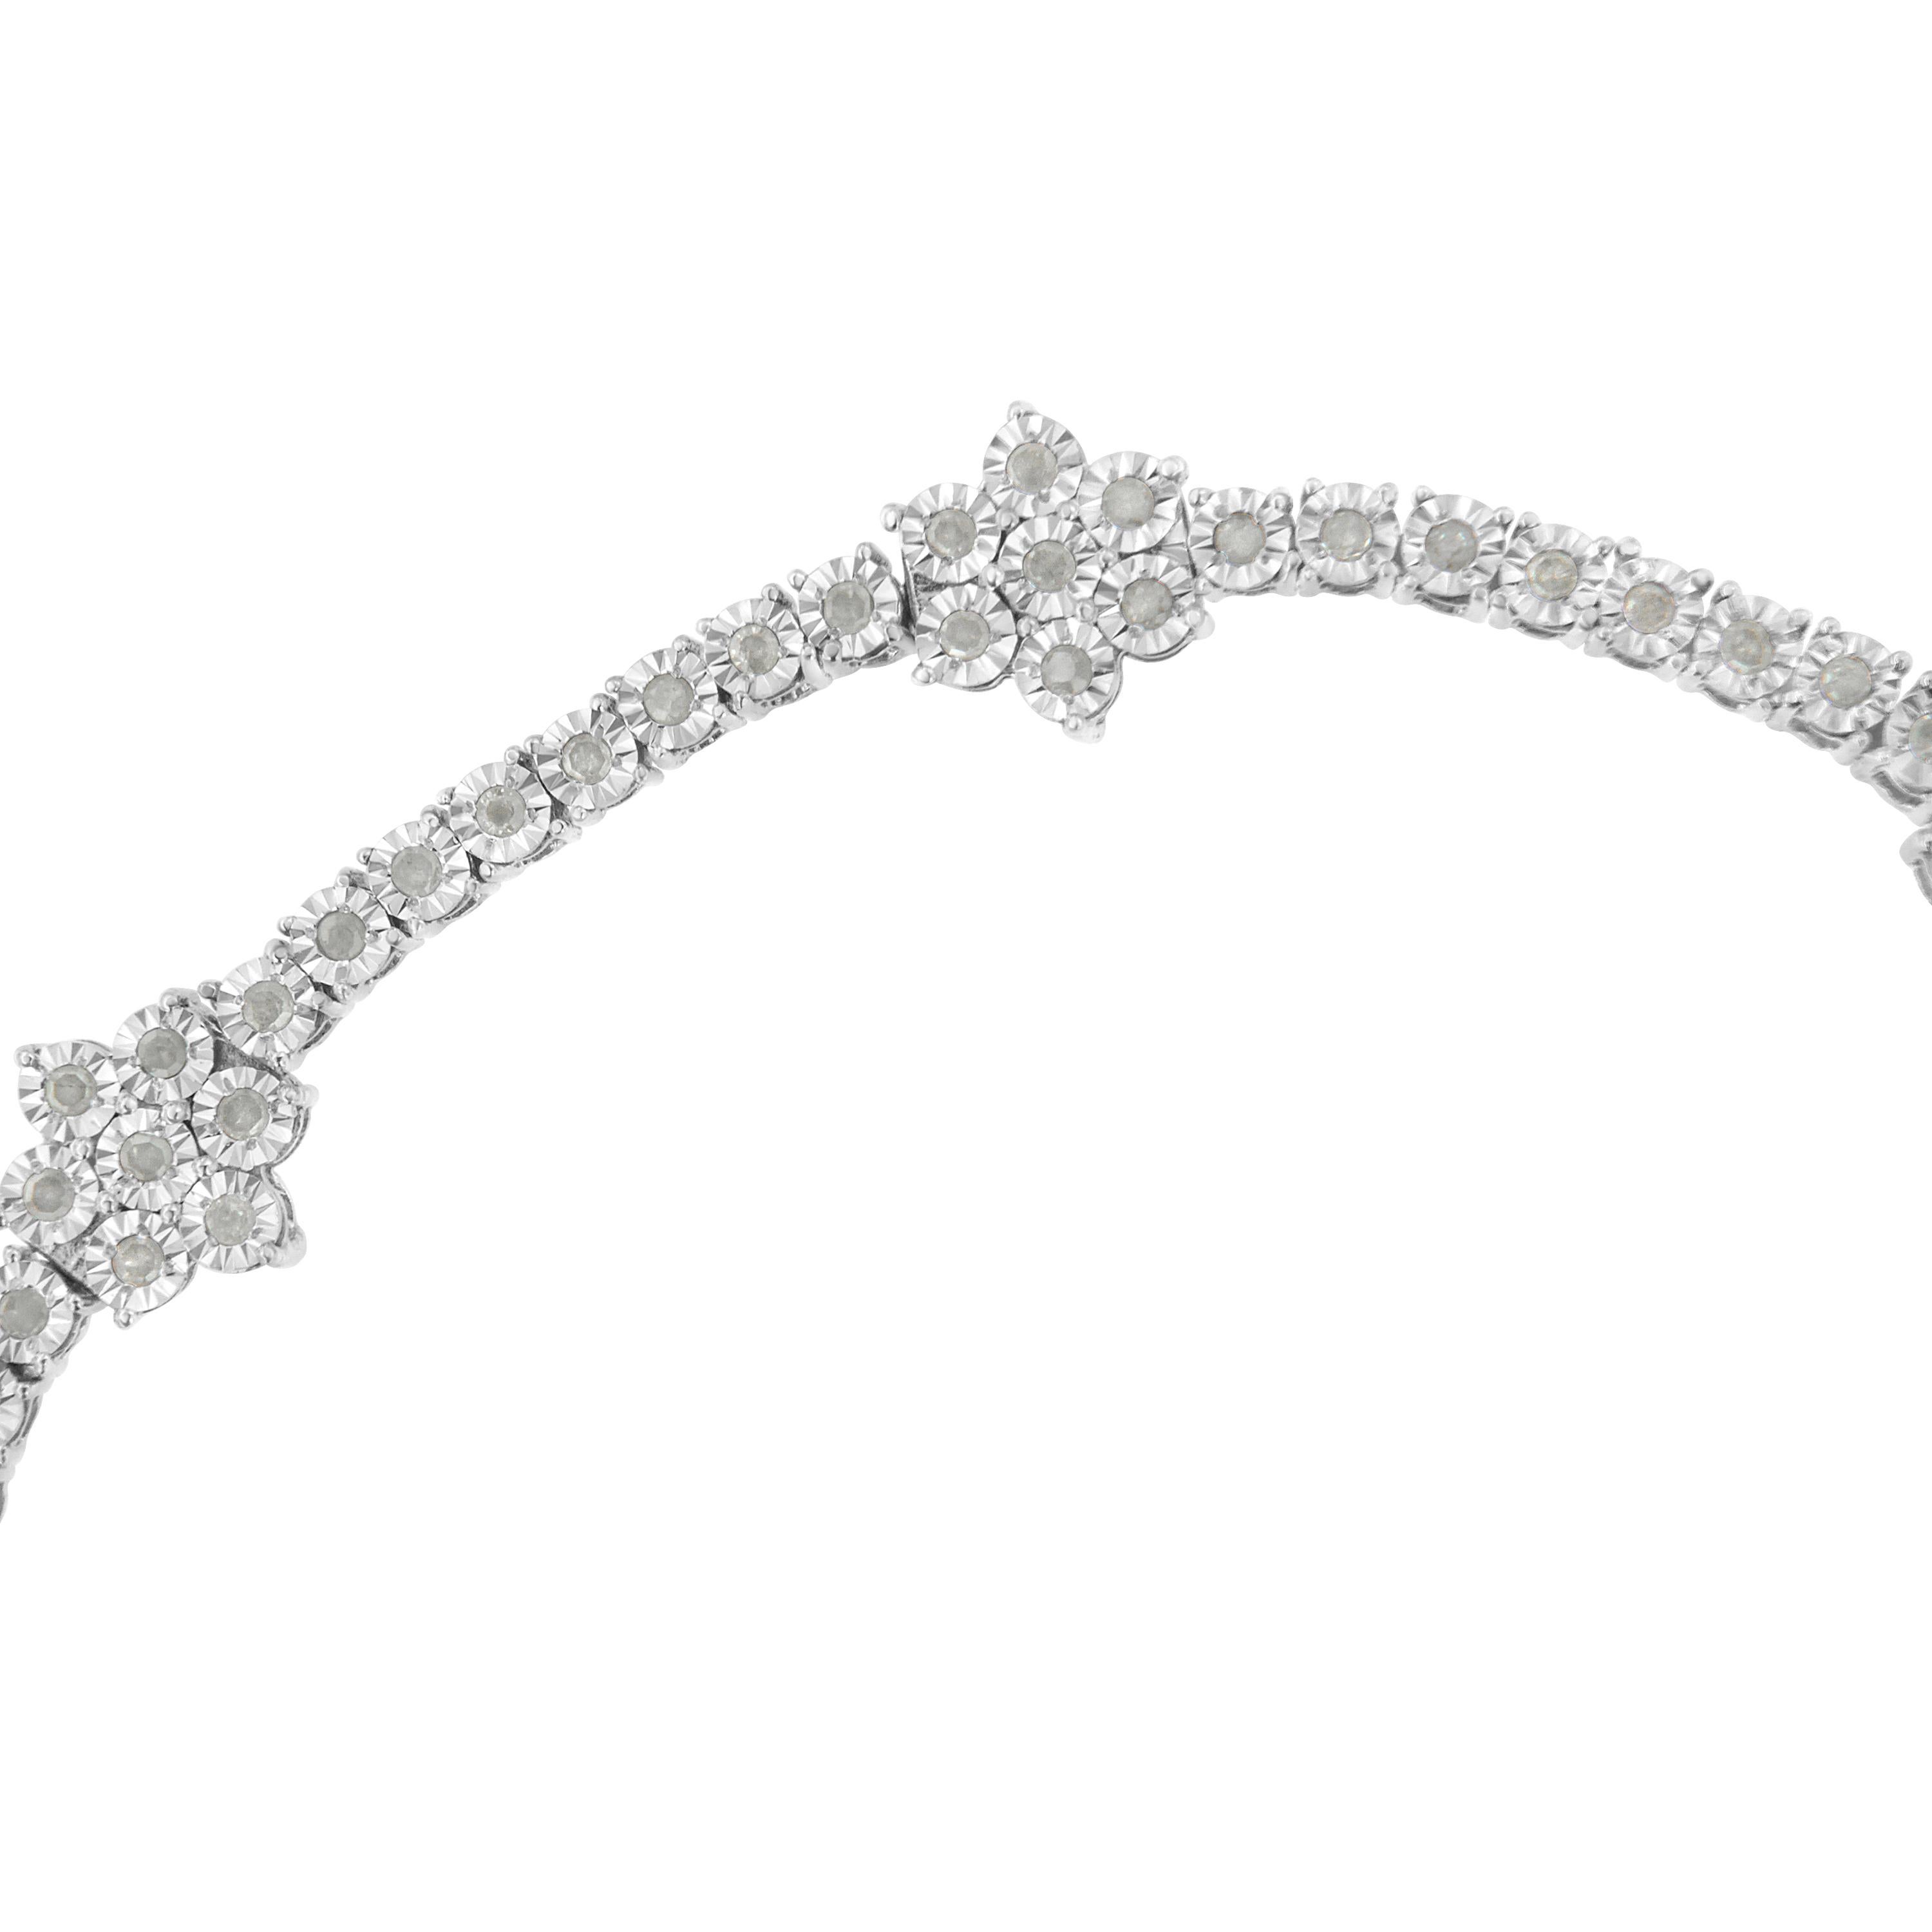 Elegant and timeless, this gorgeous sterling silver floral link bracelet features 1.0 carat total weight of round cut diamonds. The tennis bracelet features round, flower shaped cluster links along with individual four prong basket links. The